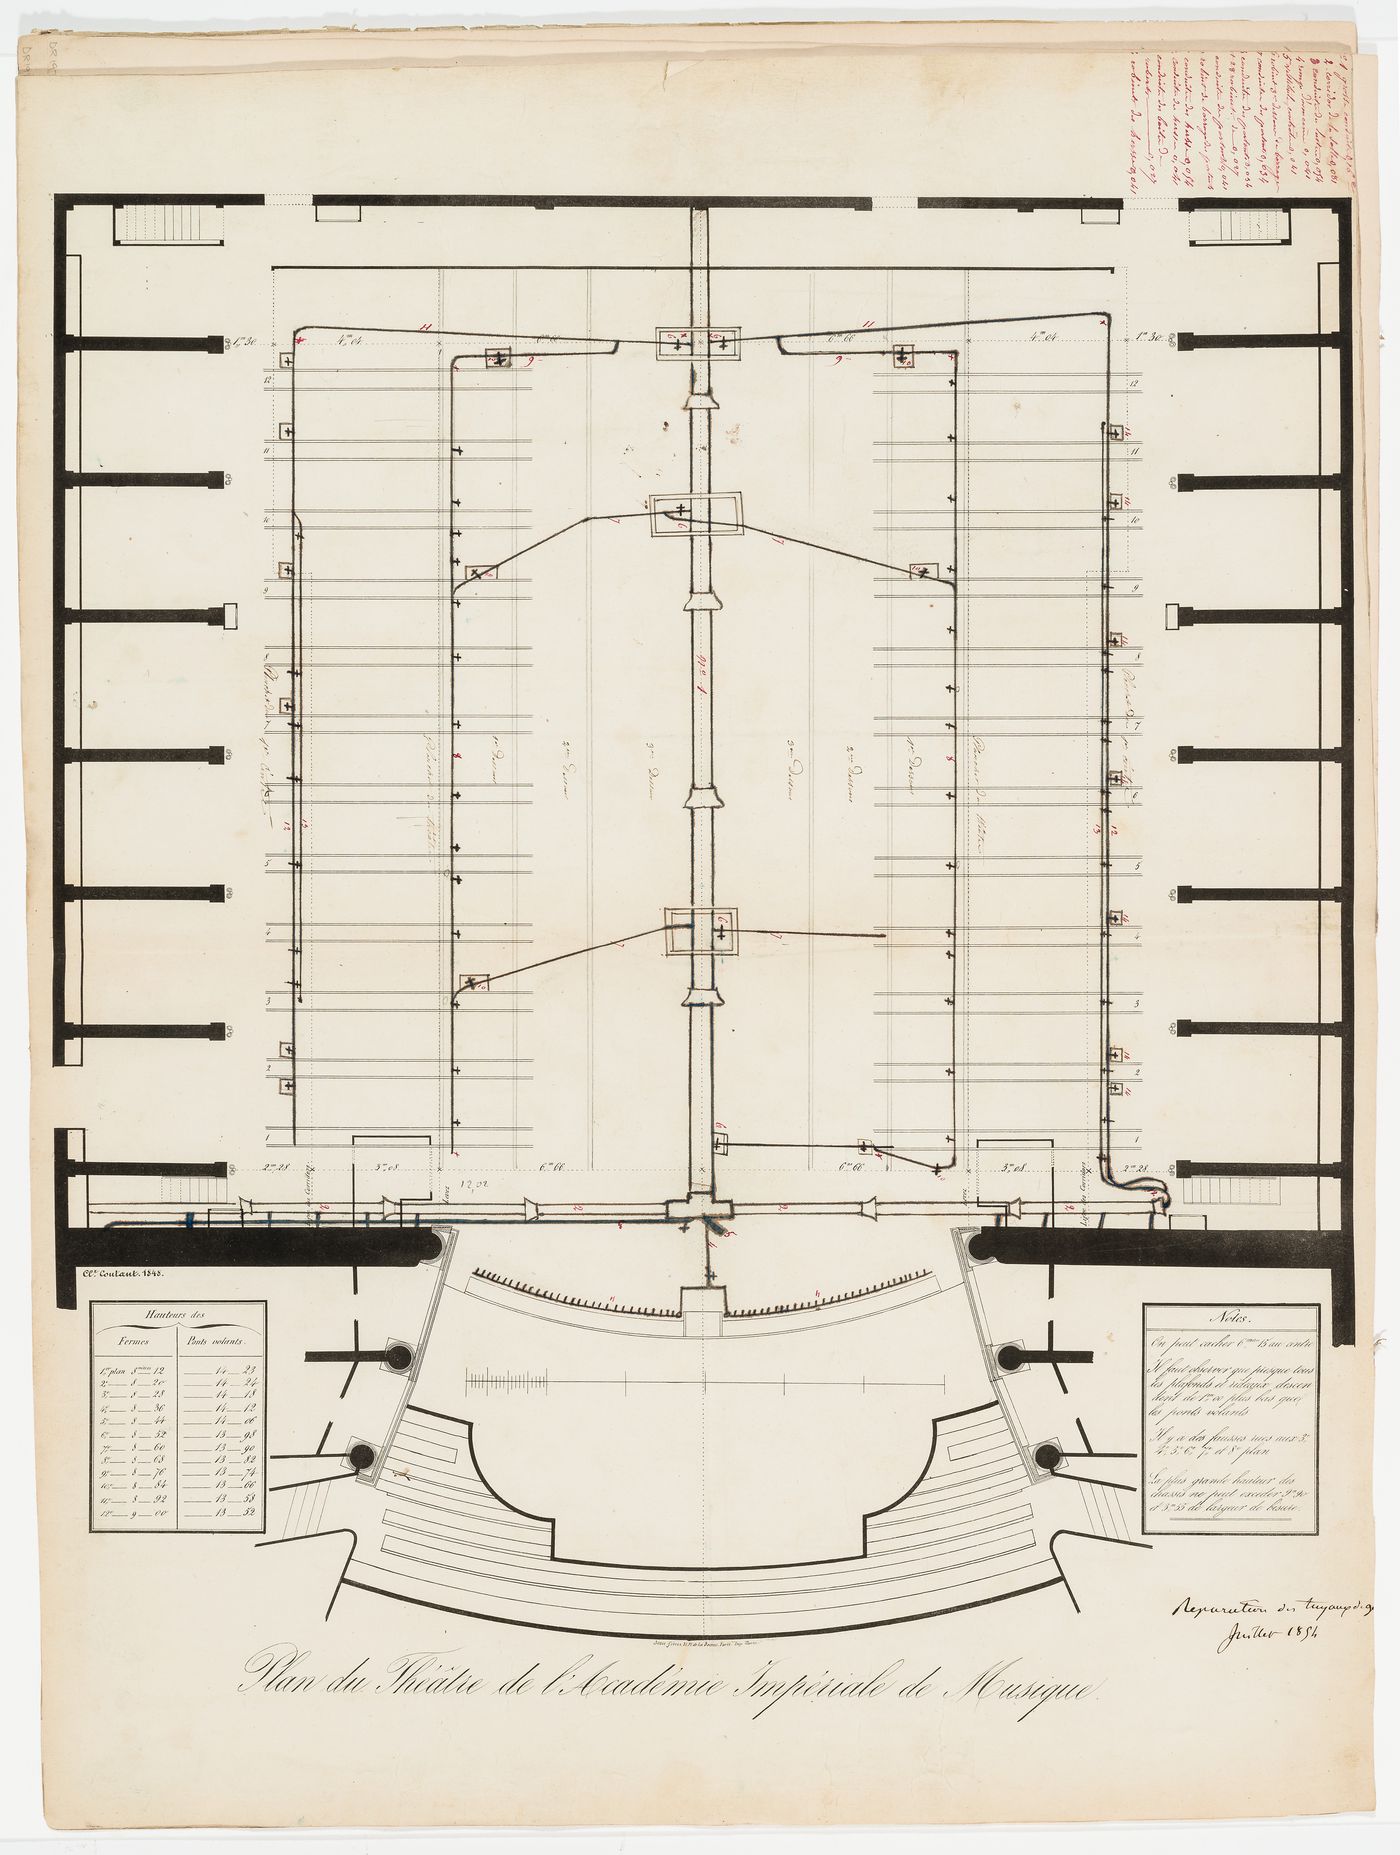 Plan, probably of the second floor, with additions for repairs to the gas pipes, Salle Le Peletier